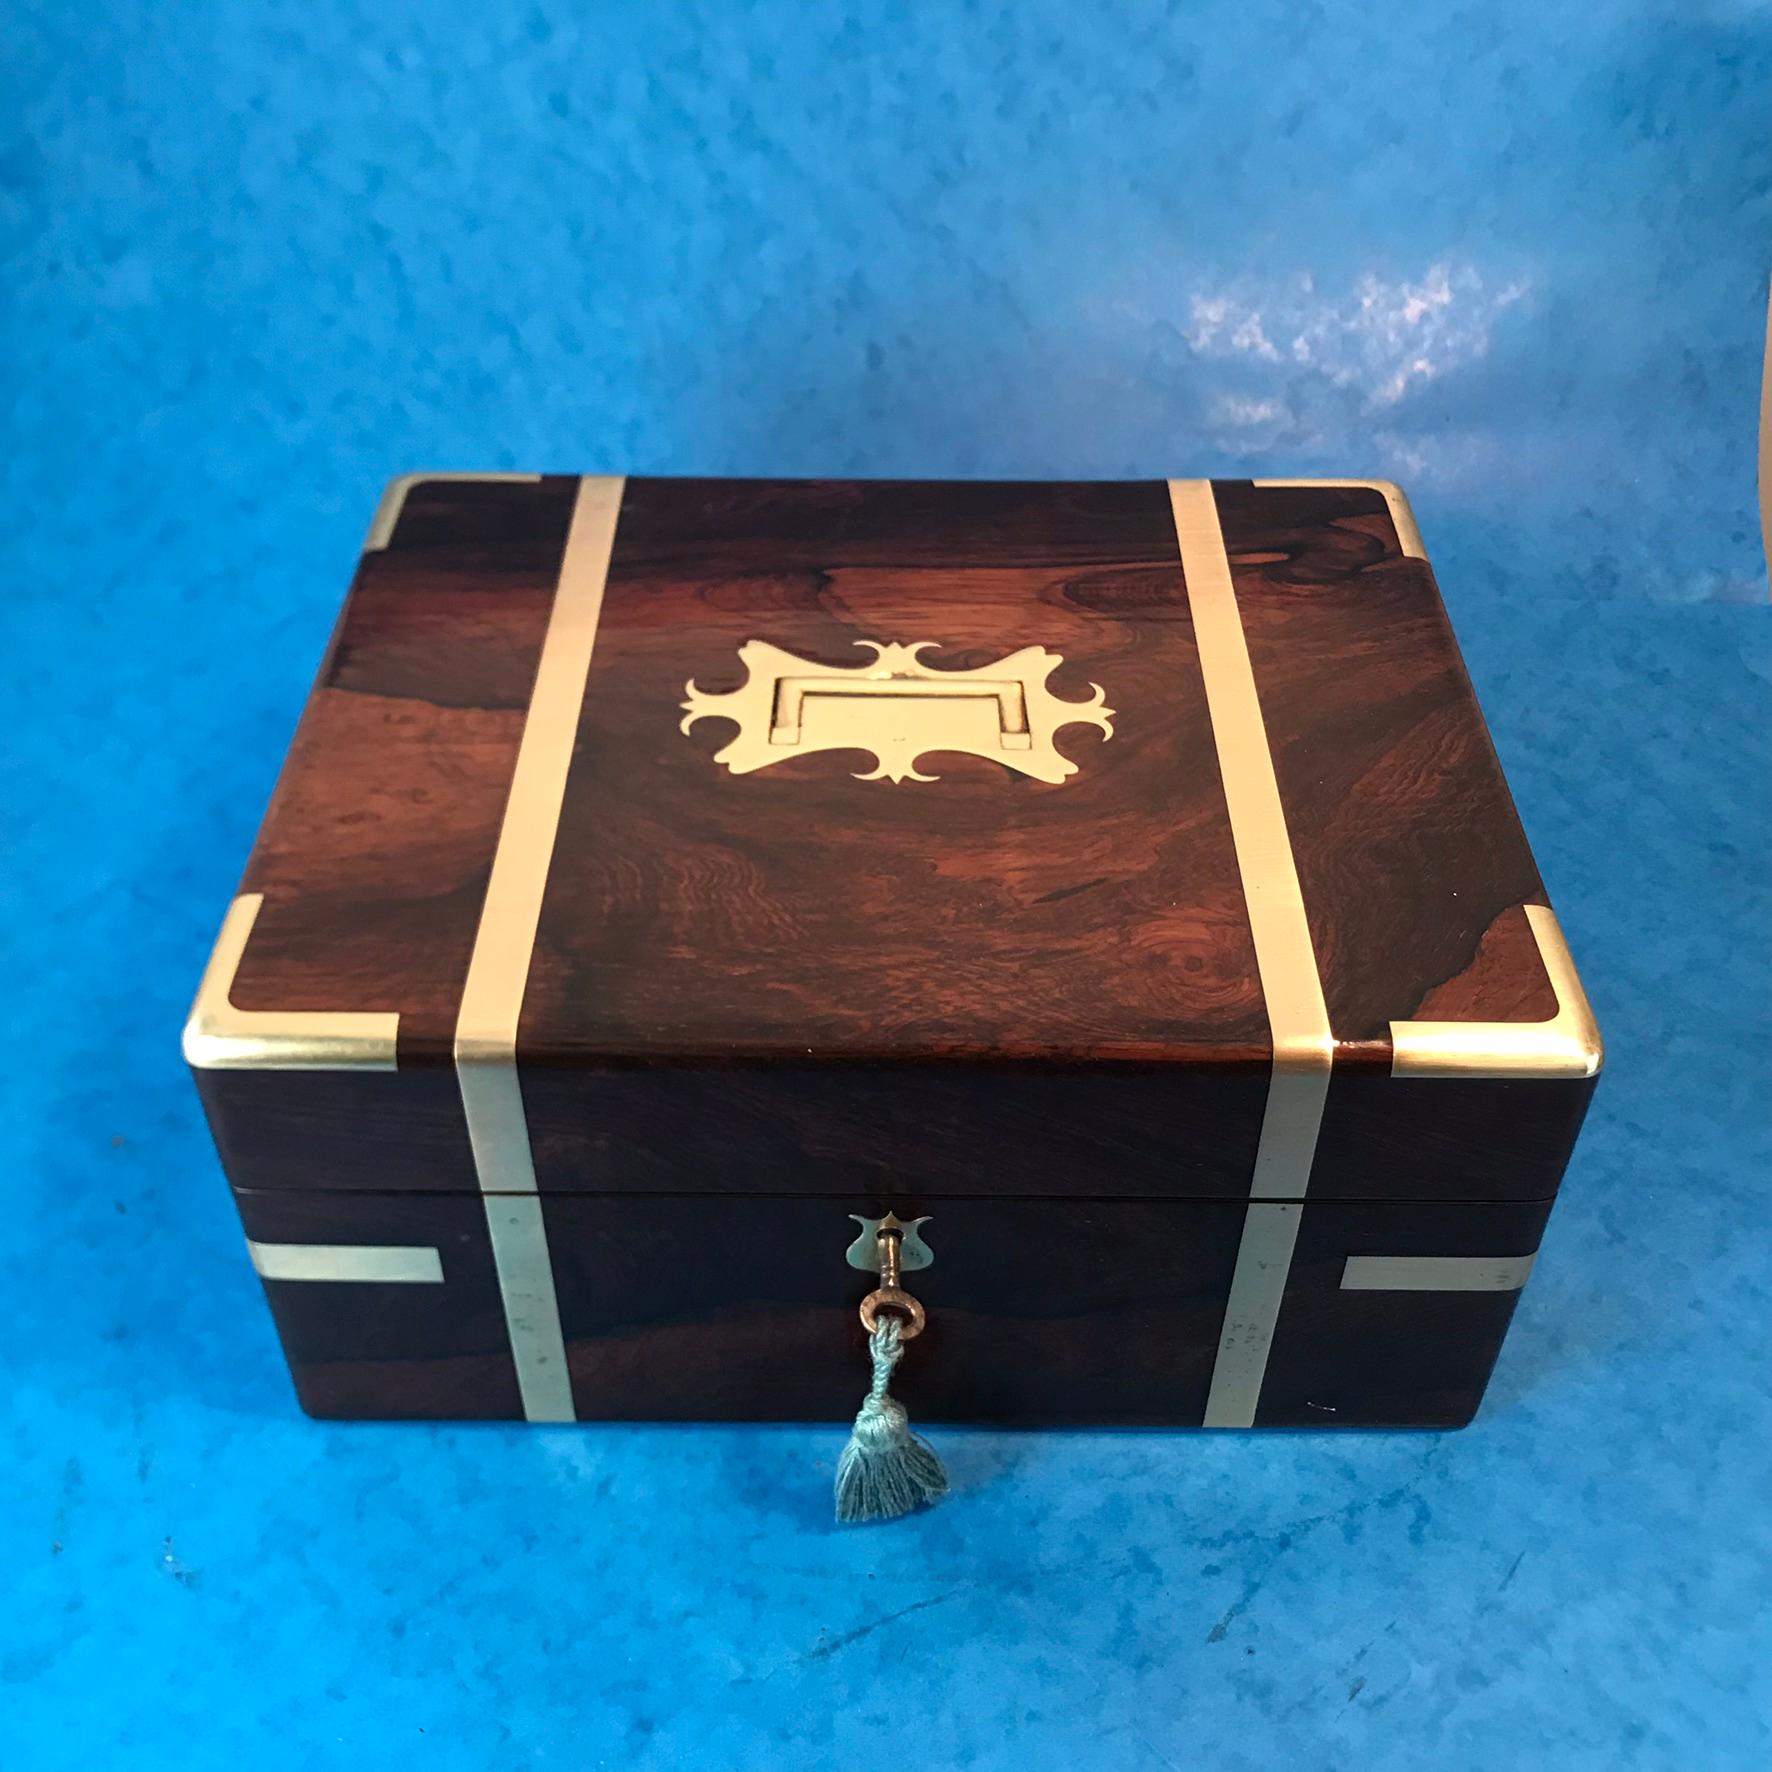 Rosewood brassbound jewelry box, the jewelry box dates back to 1830, its brassbound in a contemporary style with military flush handles to the sides with a wonderful shaped handle to the top. It has a side drawer with a pin that holds the drawer in